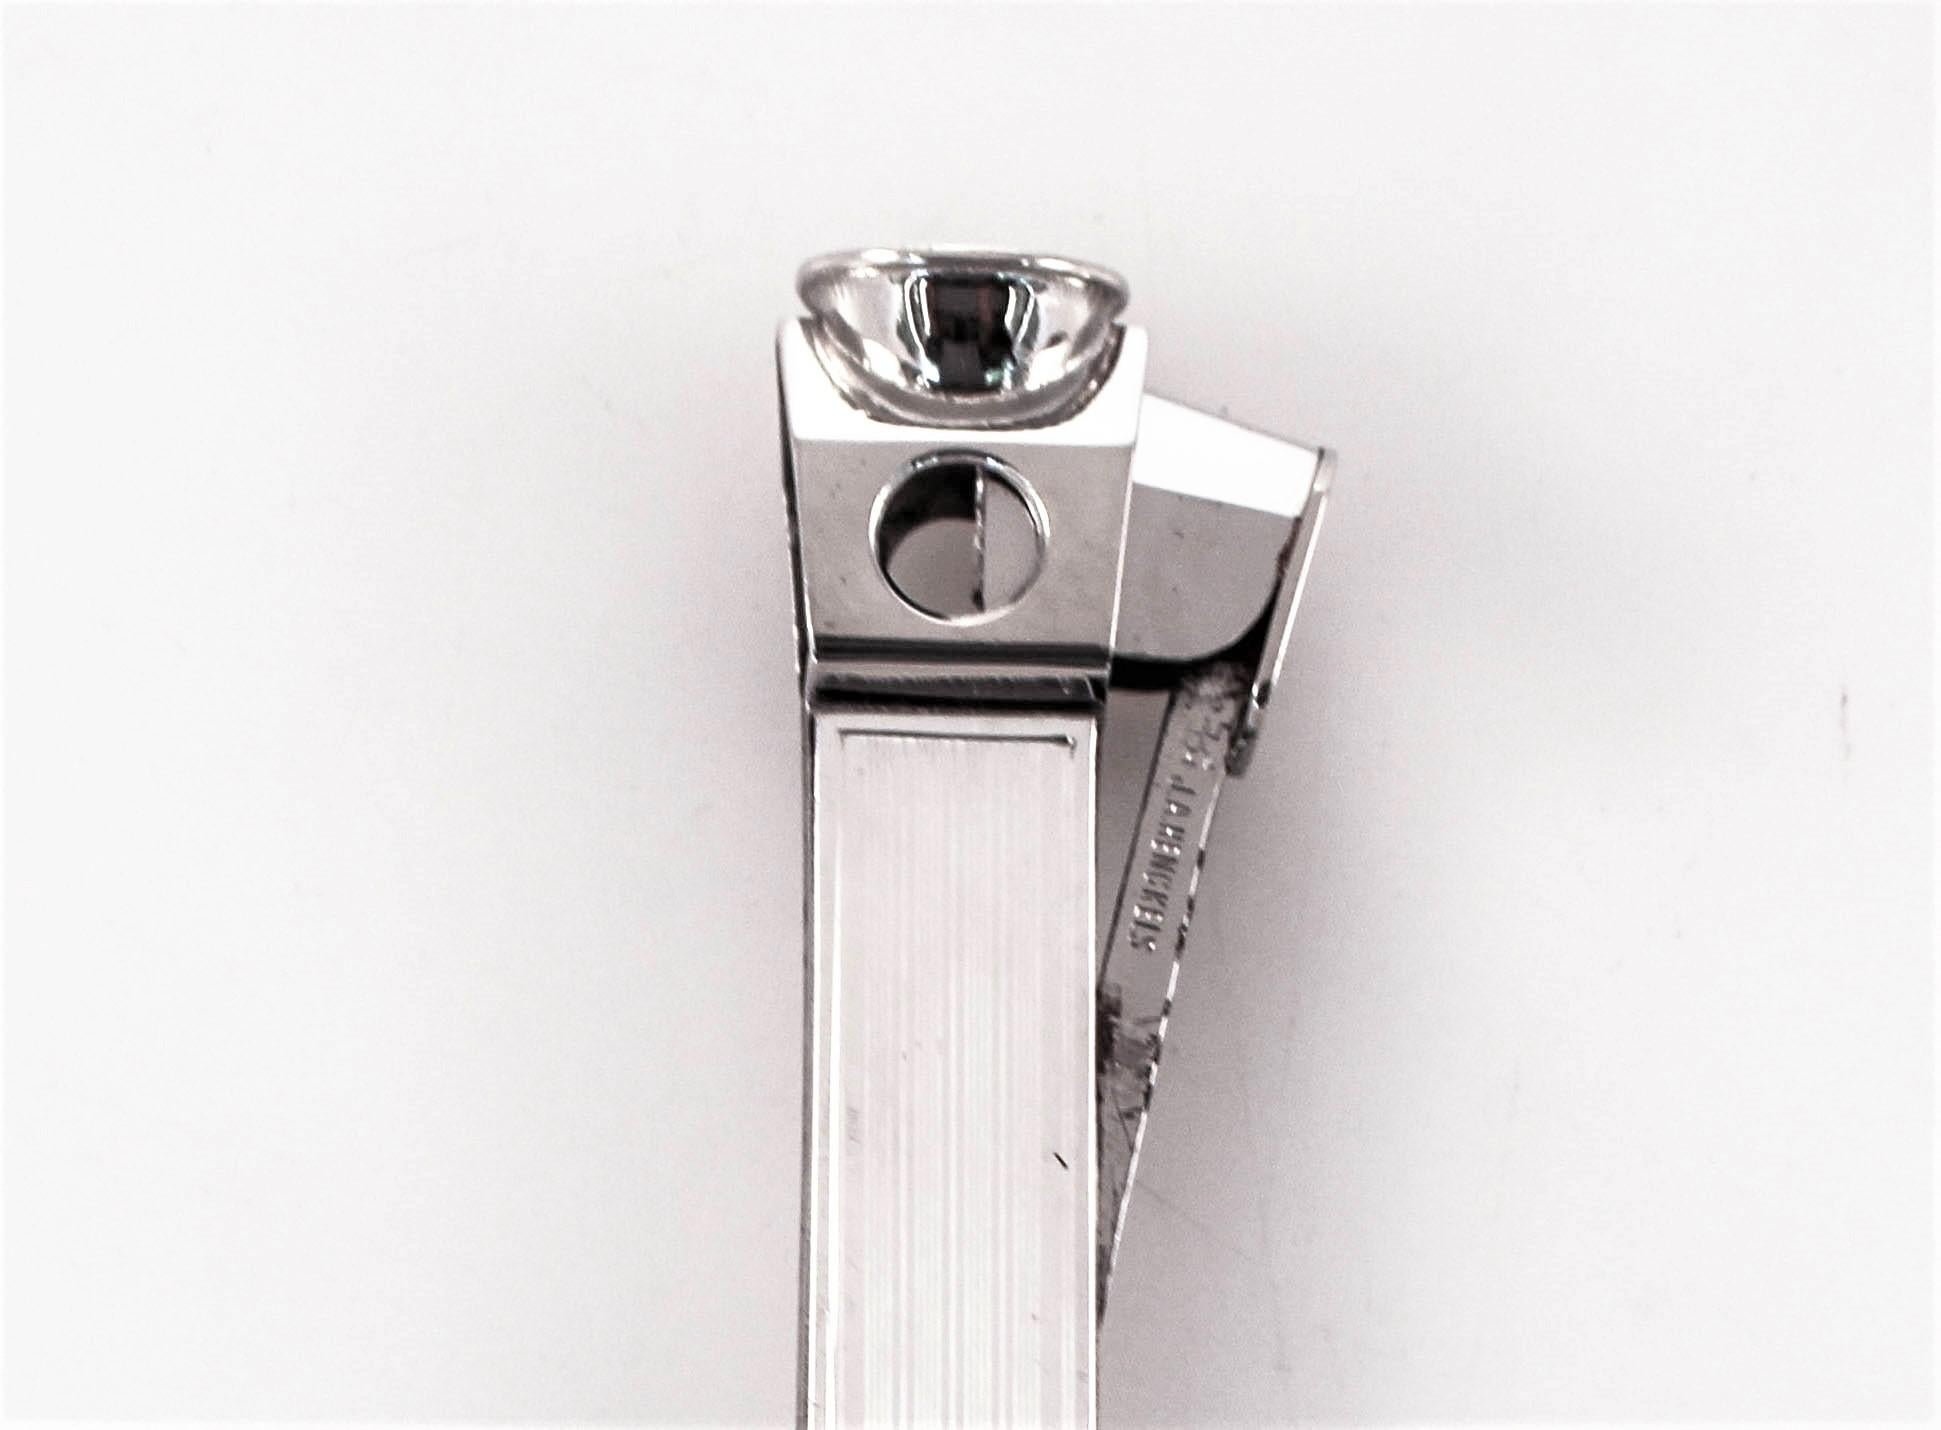 We are delighted to offer this rare sterling silver cigar cutter from the 1920s. Picture F.Scott Fitzgerald and those Long Island mansions, Duke Ellington and the Chrysler Building. This cigar cutter belonged to a generation gone but never